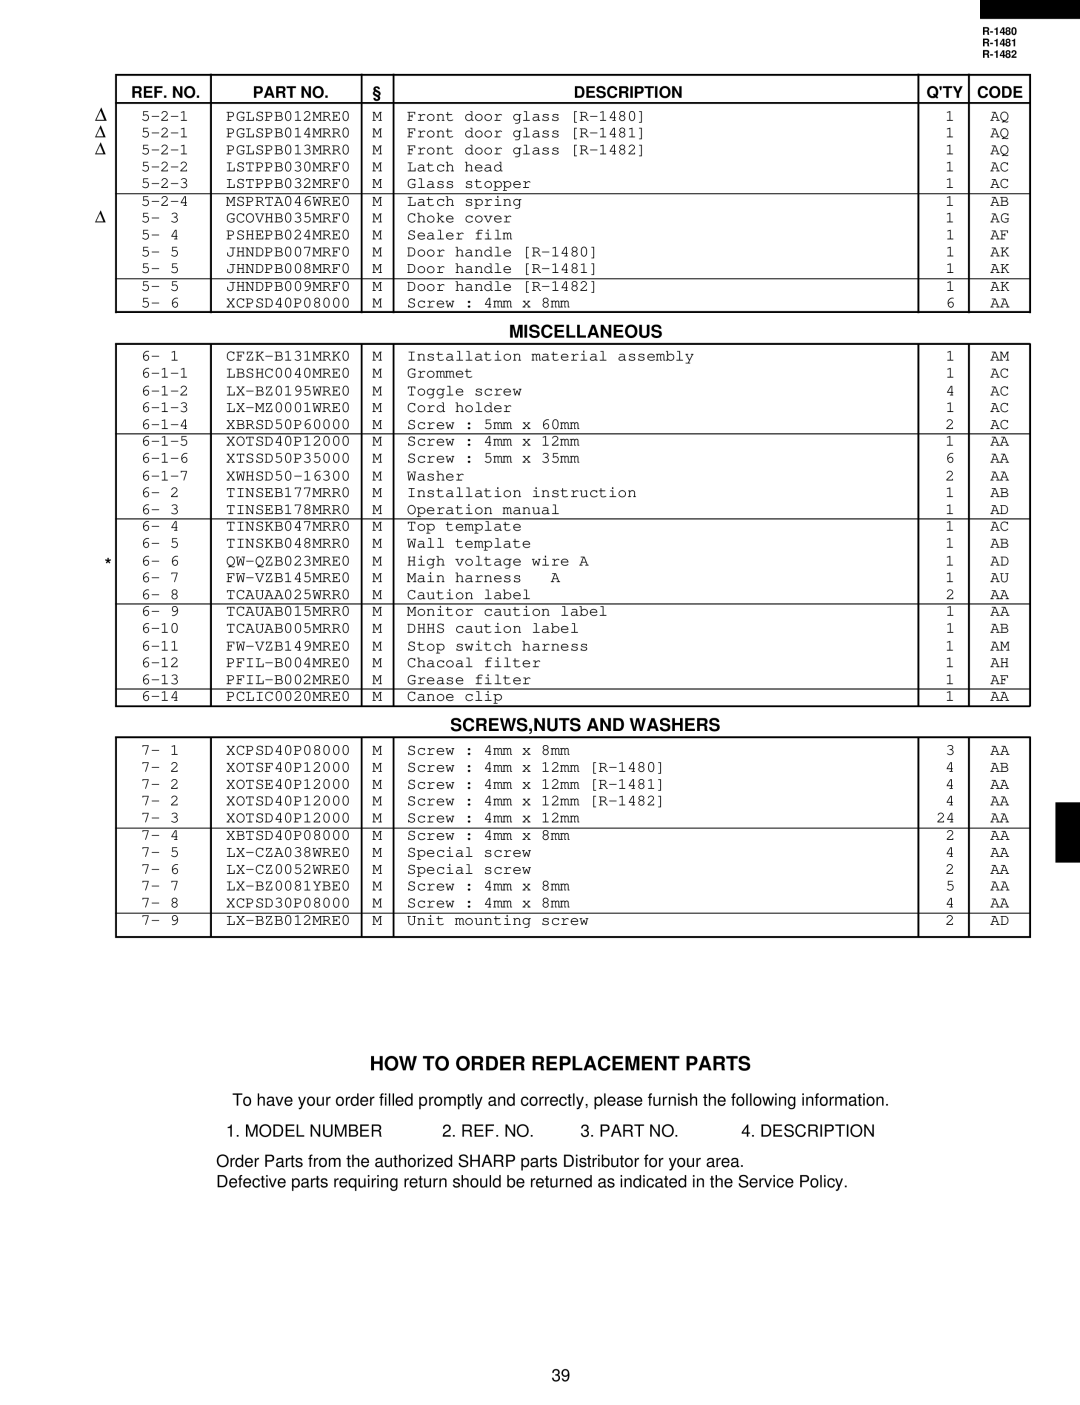 Sharp R-1481, R-1480, R-1482 service manual How To Order Replacement Parts, Miscellaneous, Screws,Nuts And Washers 